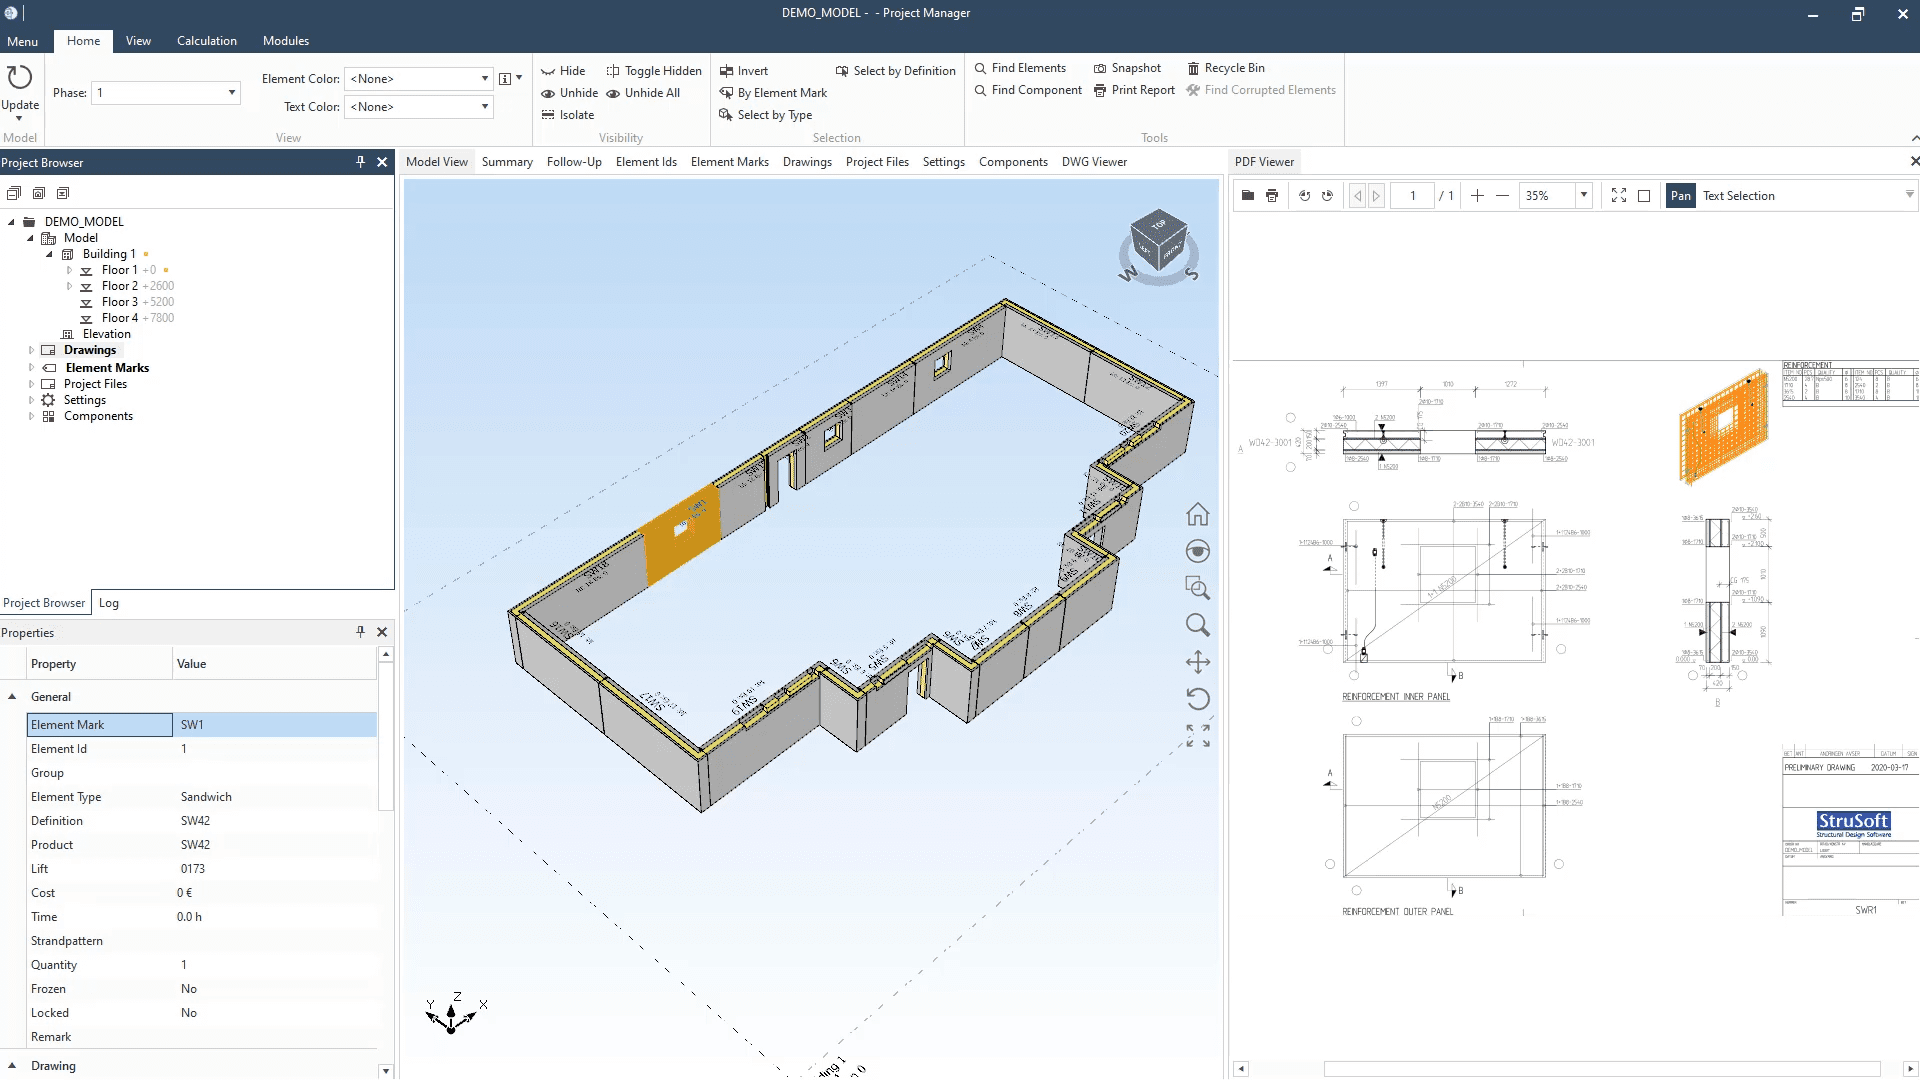 Precast Sandwich Wall Design with the IMPACT software